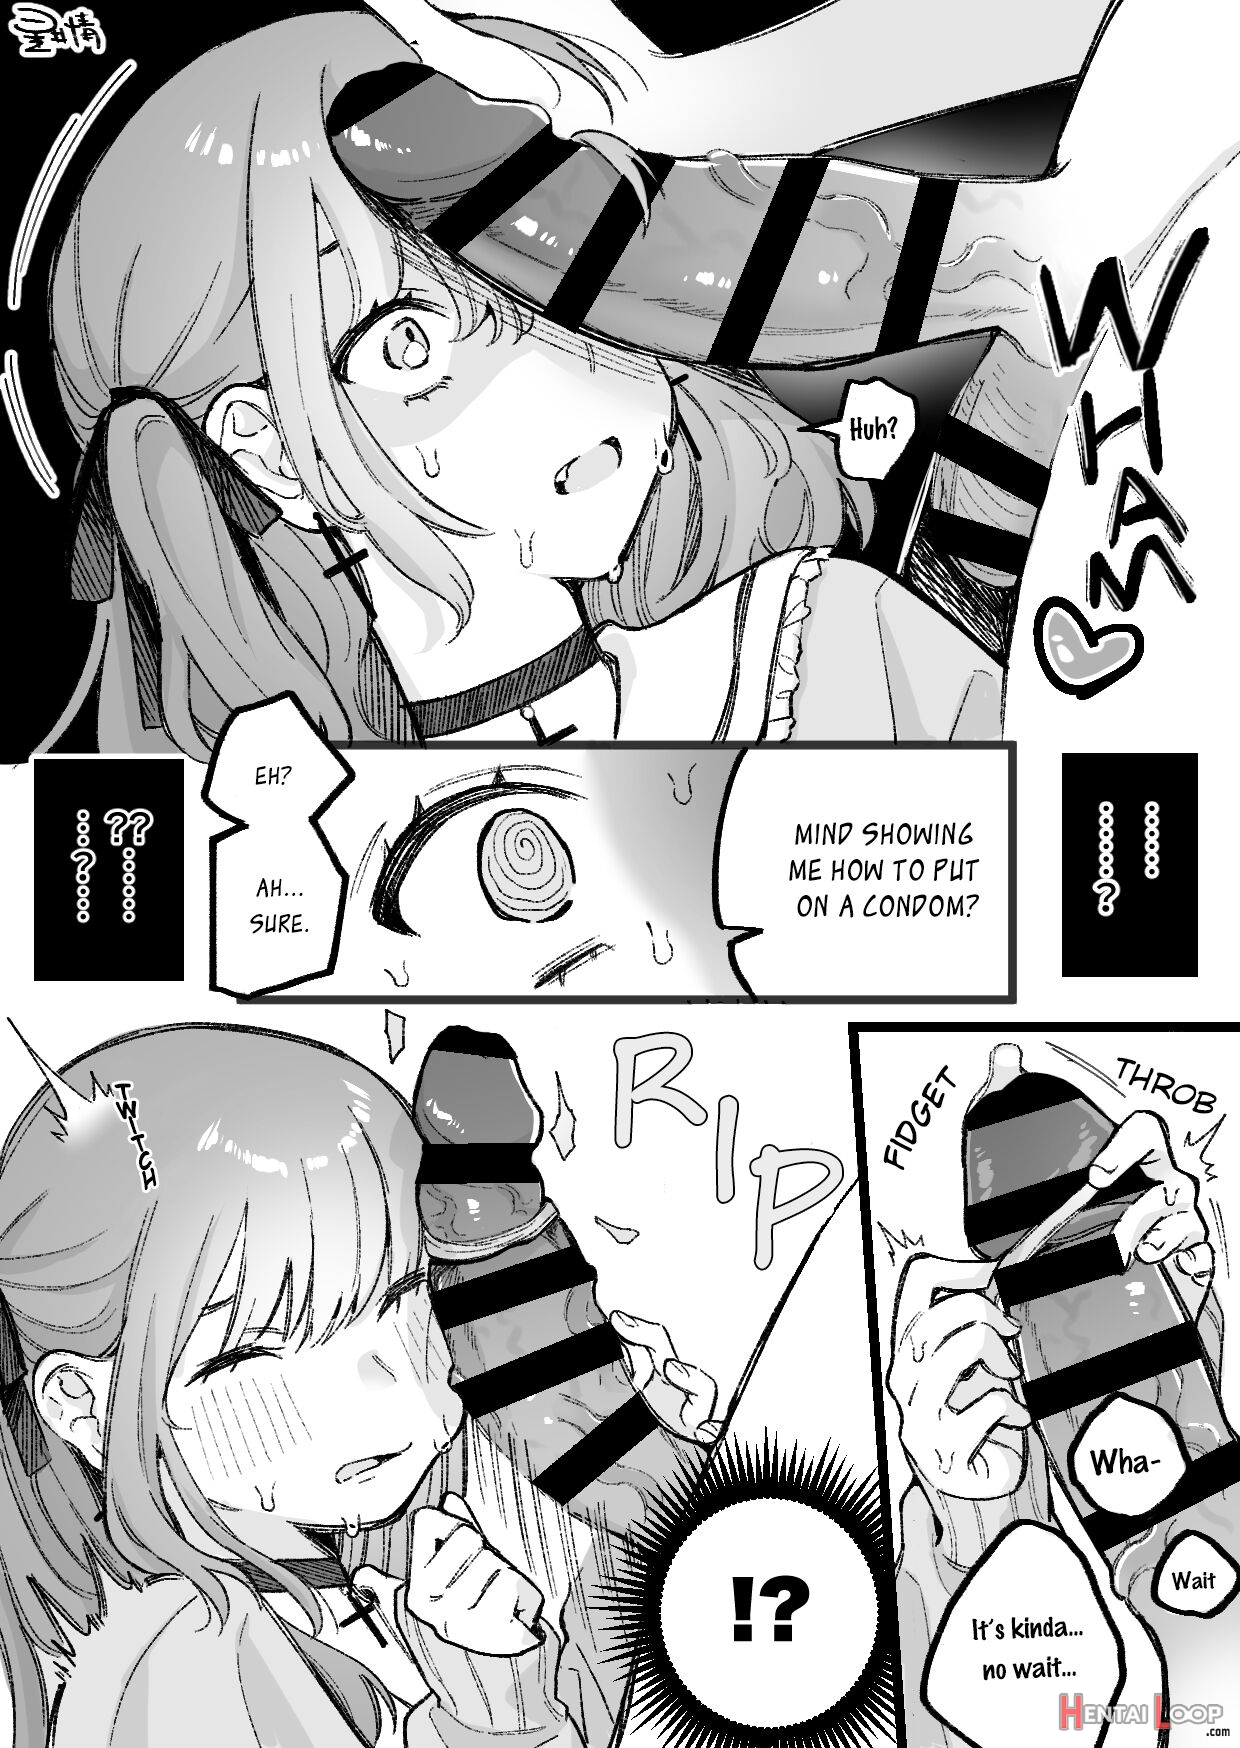 Hime-chan Total Defeat + Hime-chan Returns. page 2